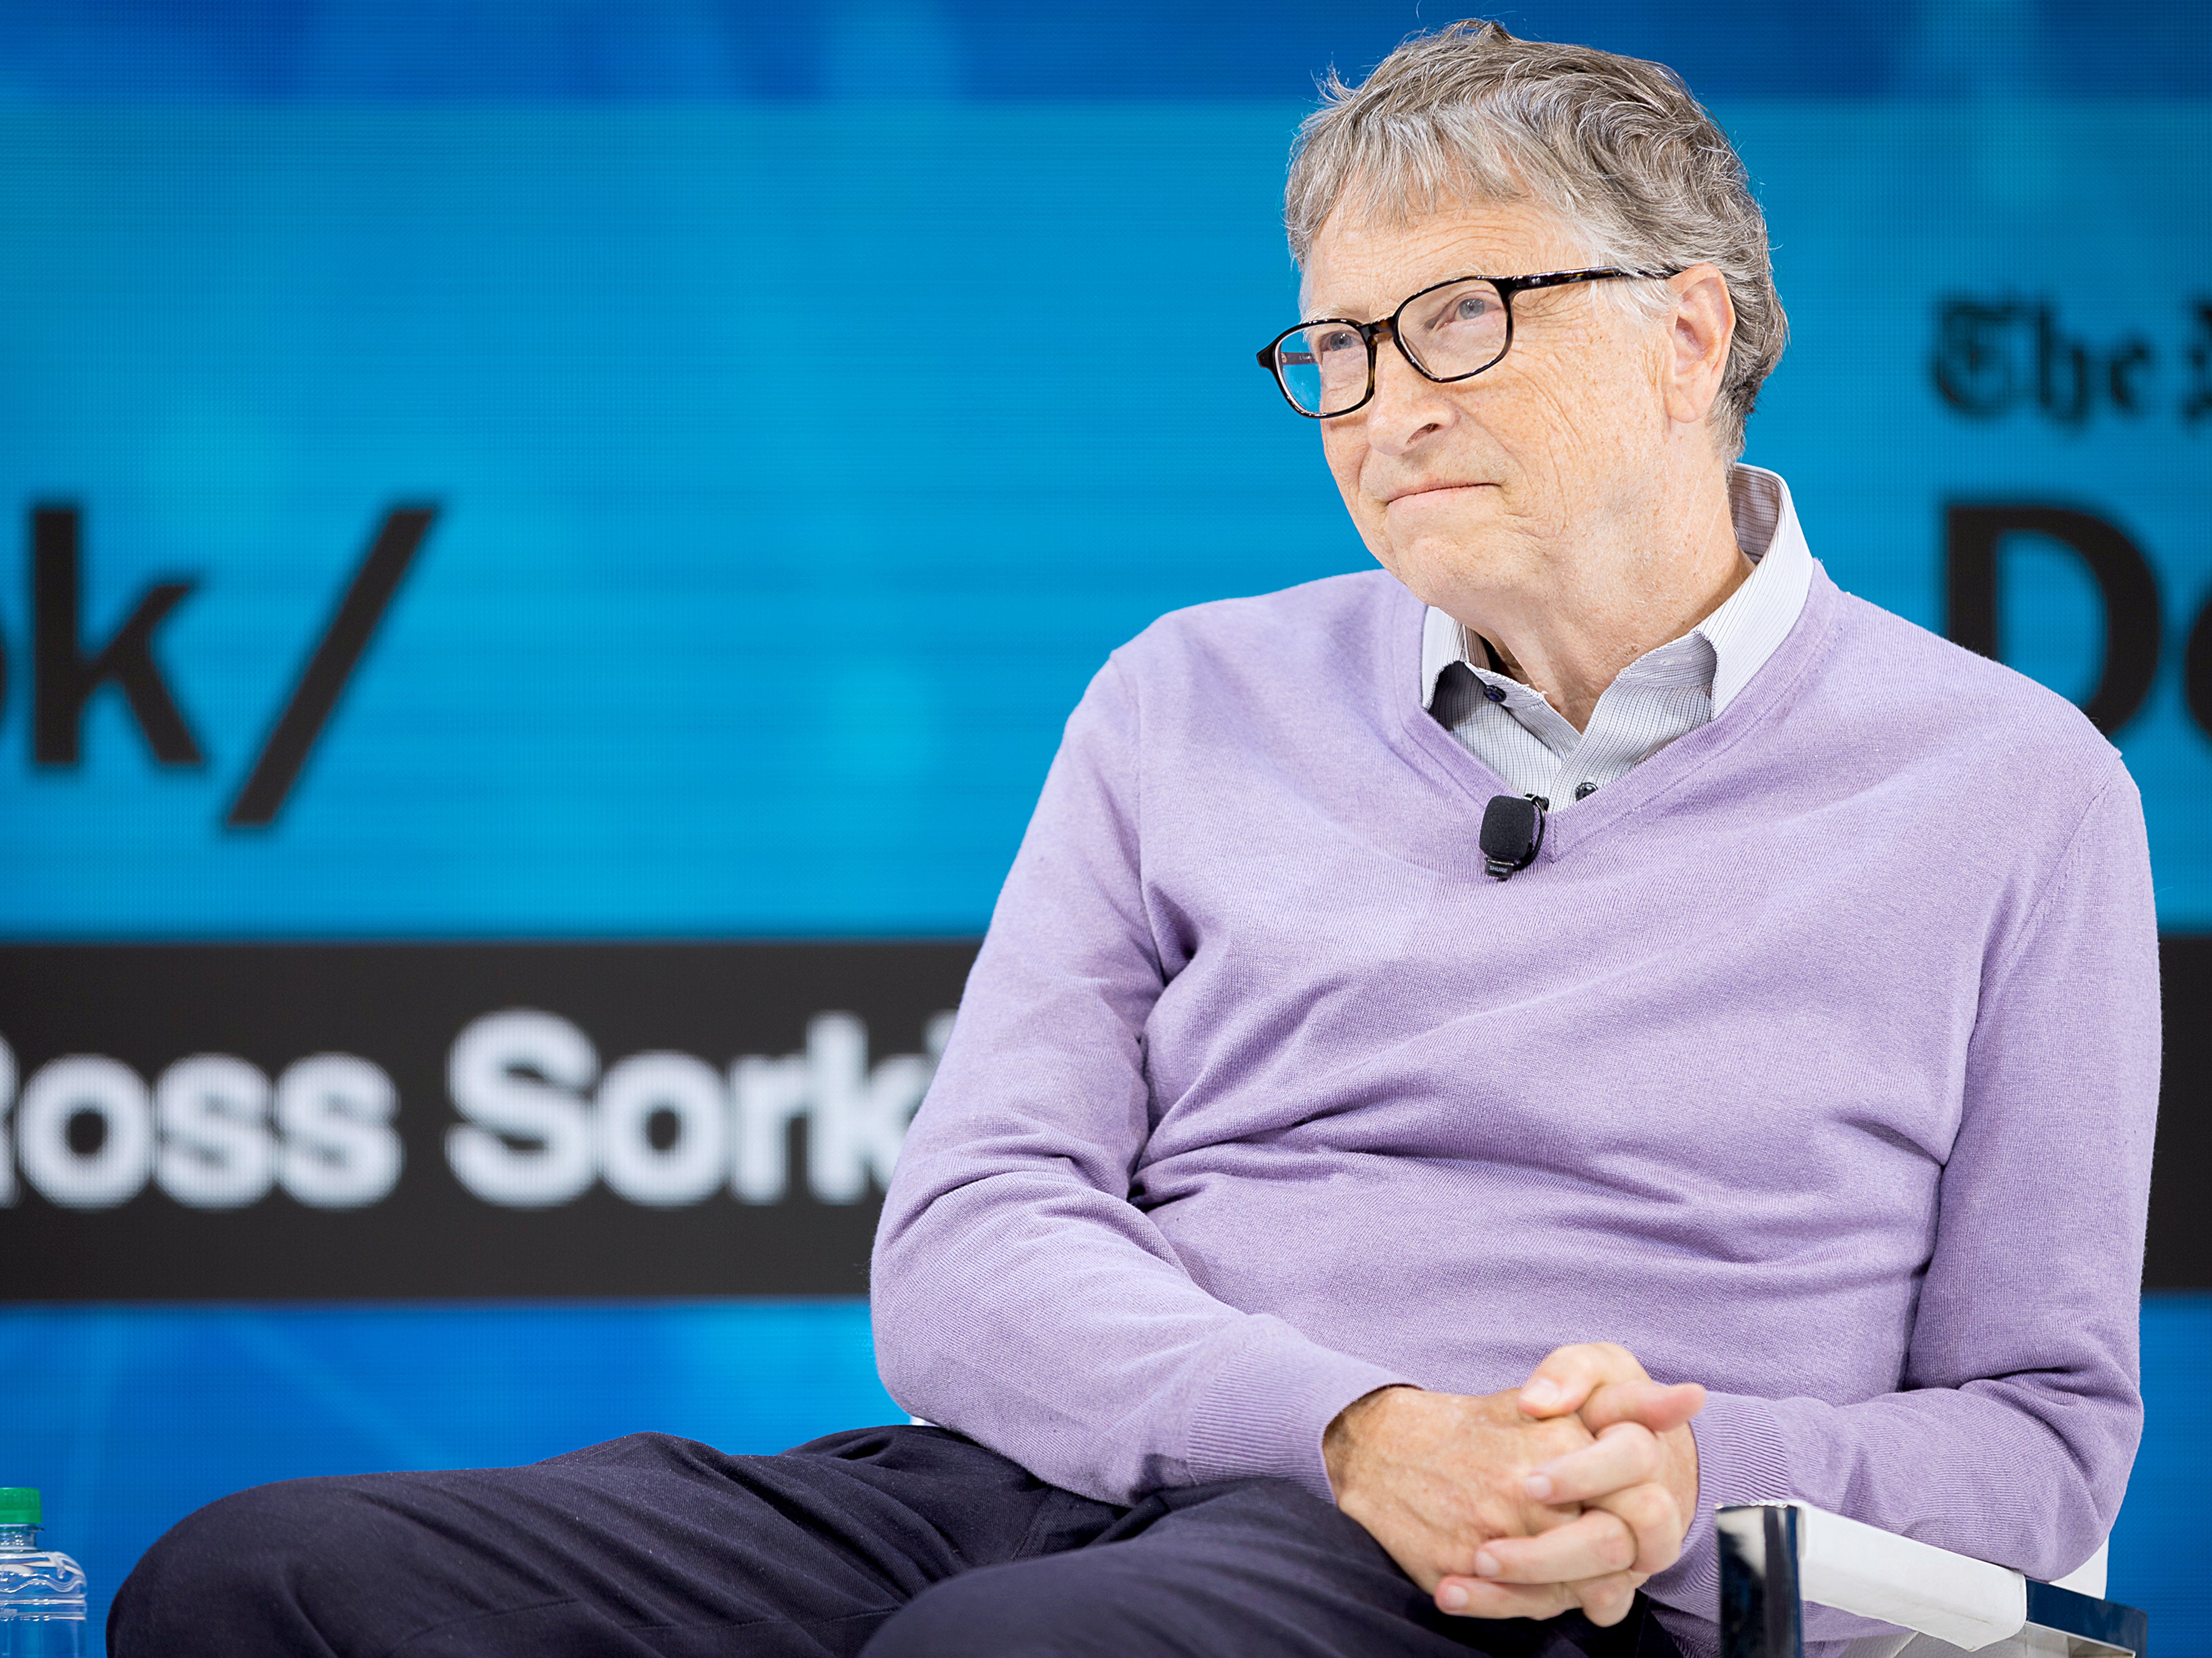 Bill Gates and his wife Melinda announced their intention to divorce earlier this month